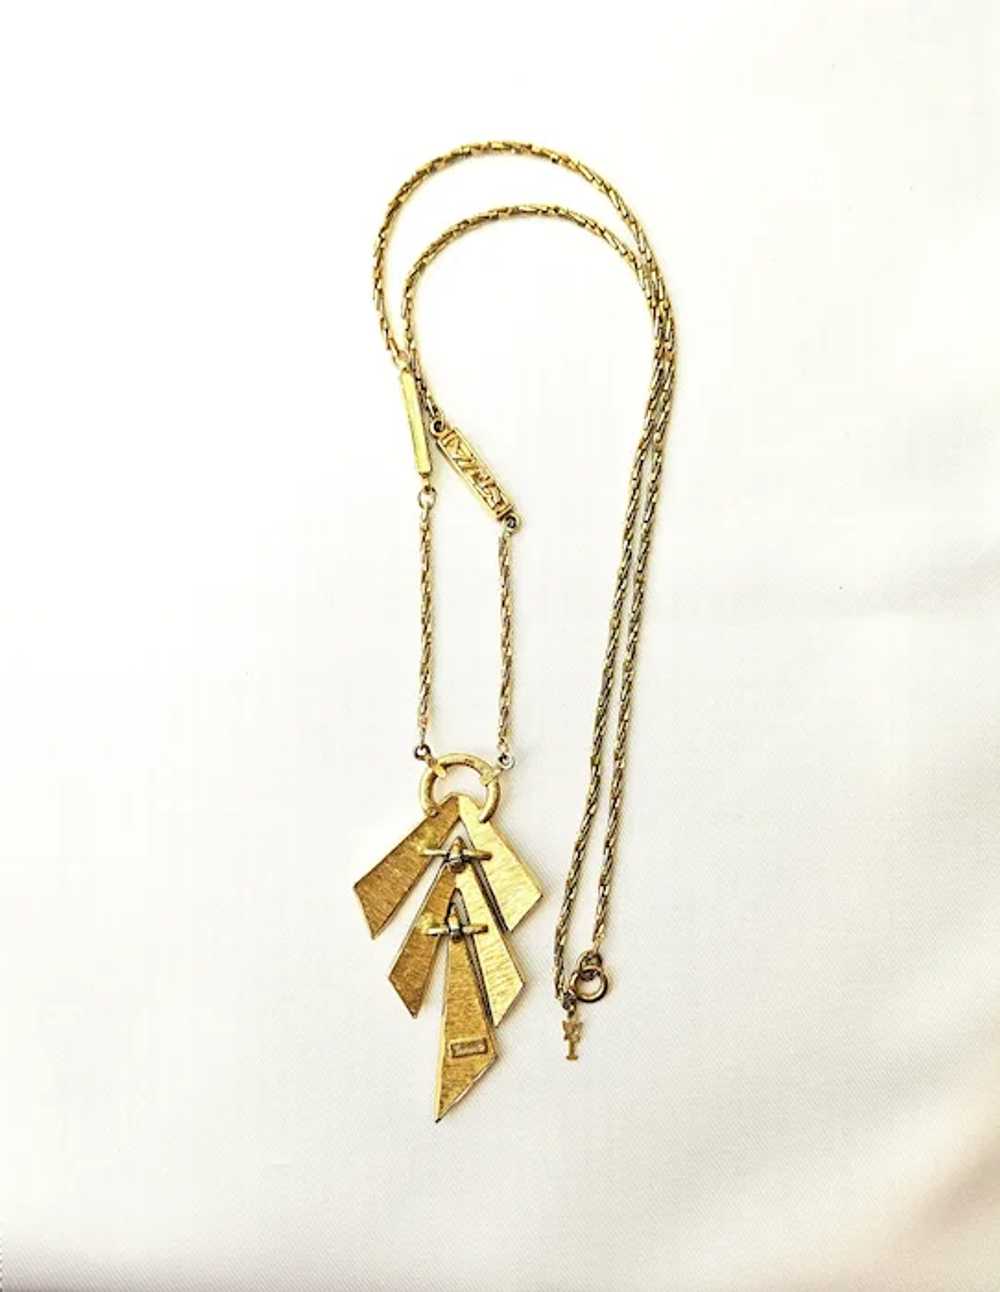 Vintage Trifari Gold-Tone Metal Sections Necklace - image 7